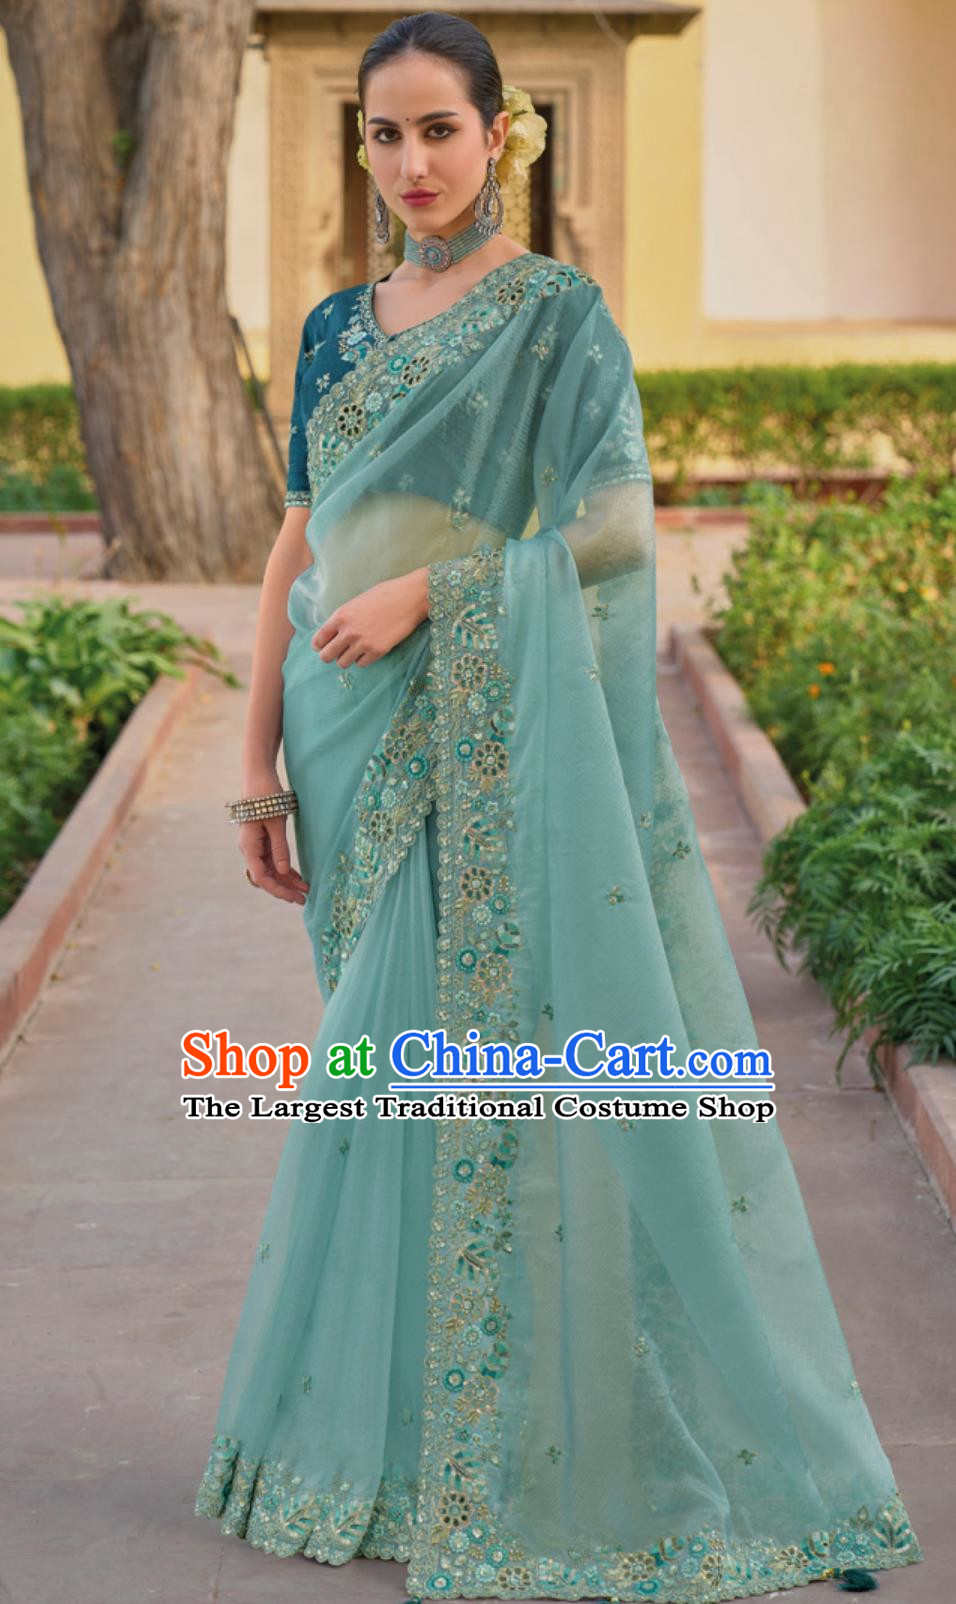 India Traditional Sari National Clothing Indian Festival Costume Women Embroidered Light Blue Saree Dress